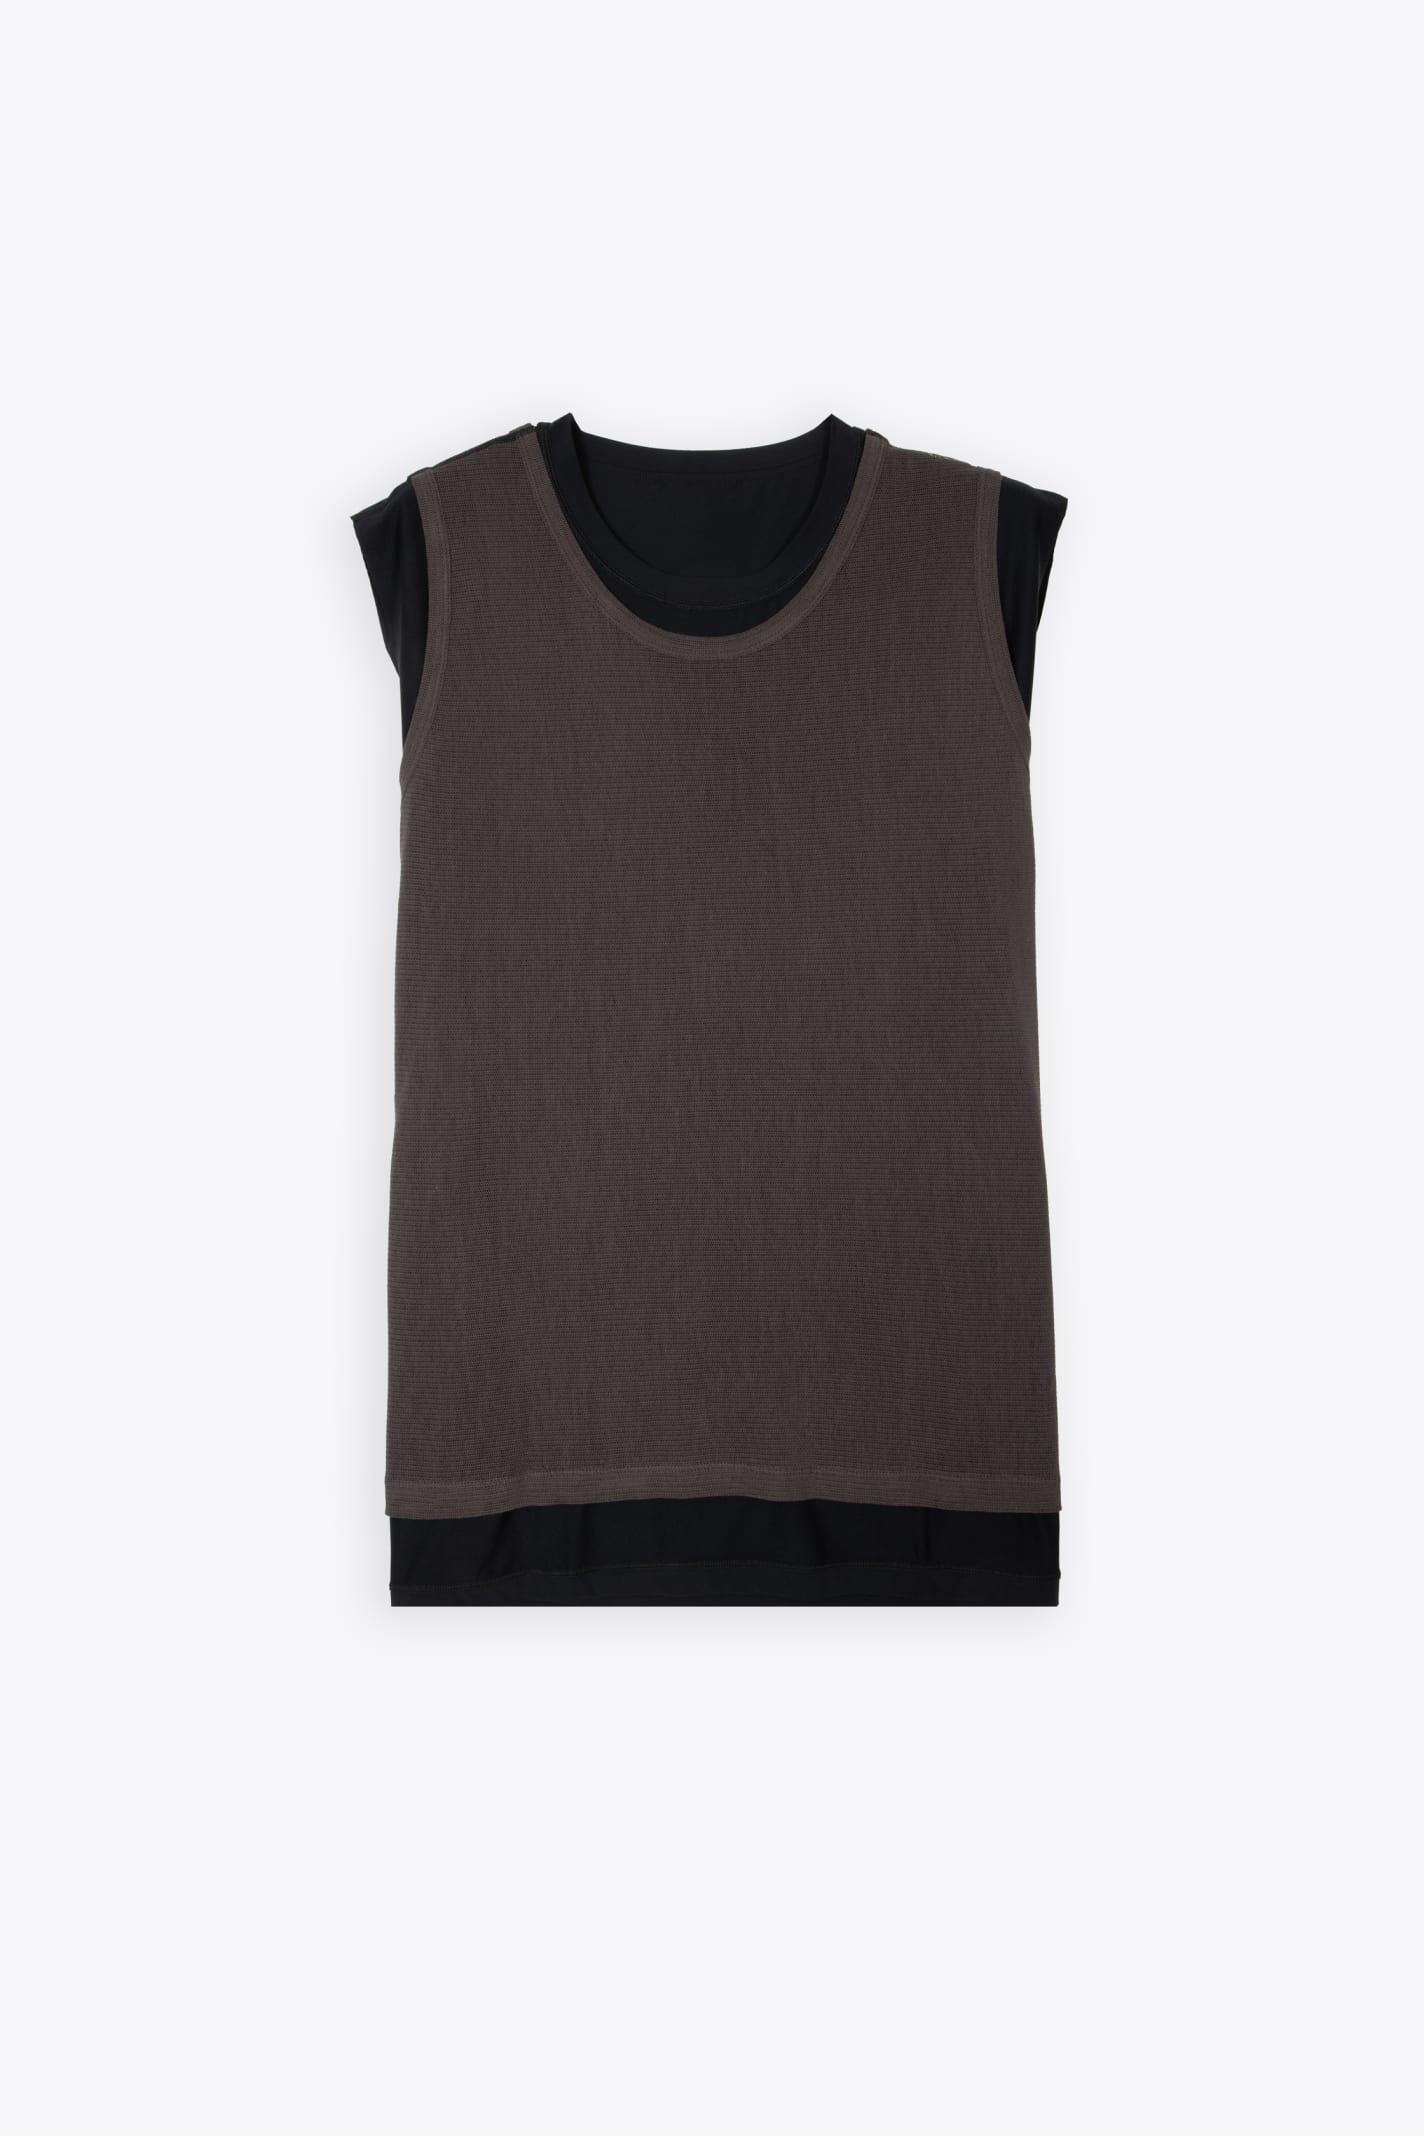 Reversible Gravity Tank Black jersey and brown mesh reversible tank - Reversible Gravity Tank